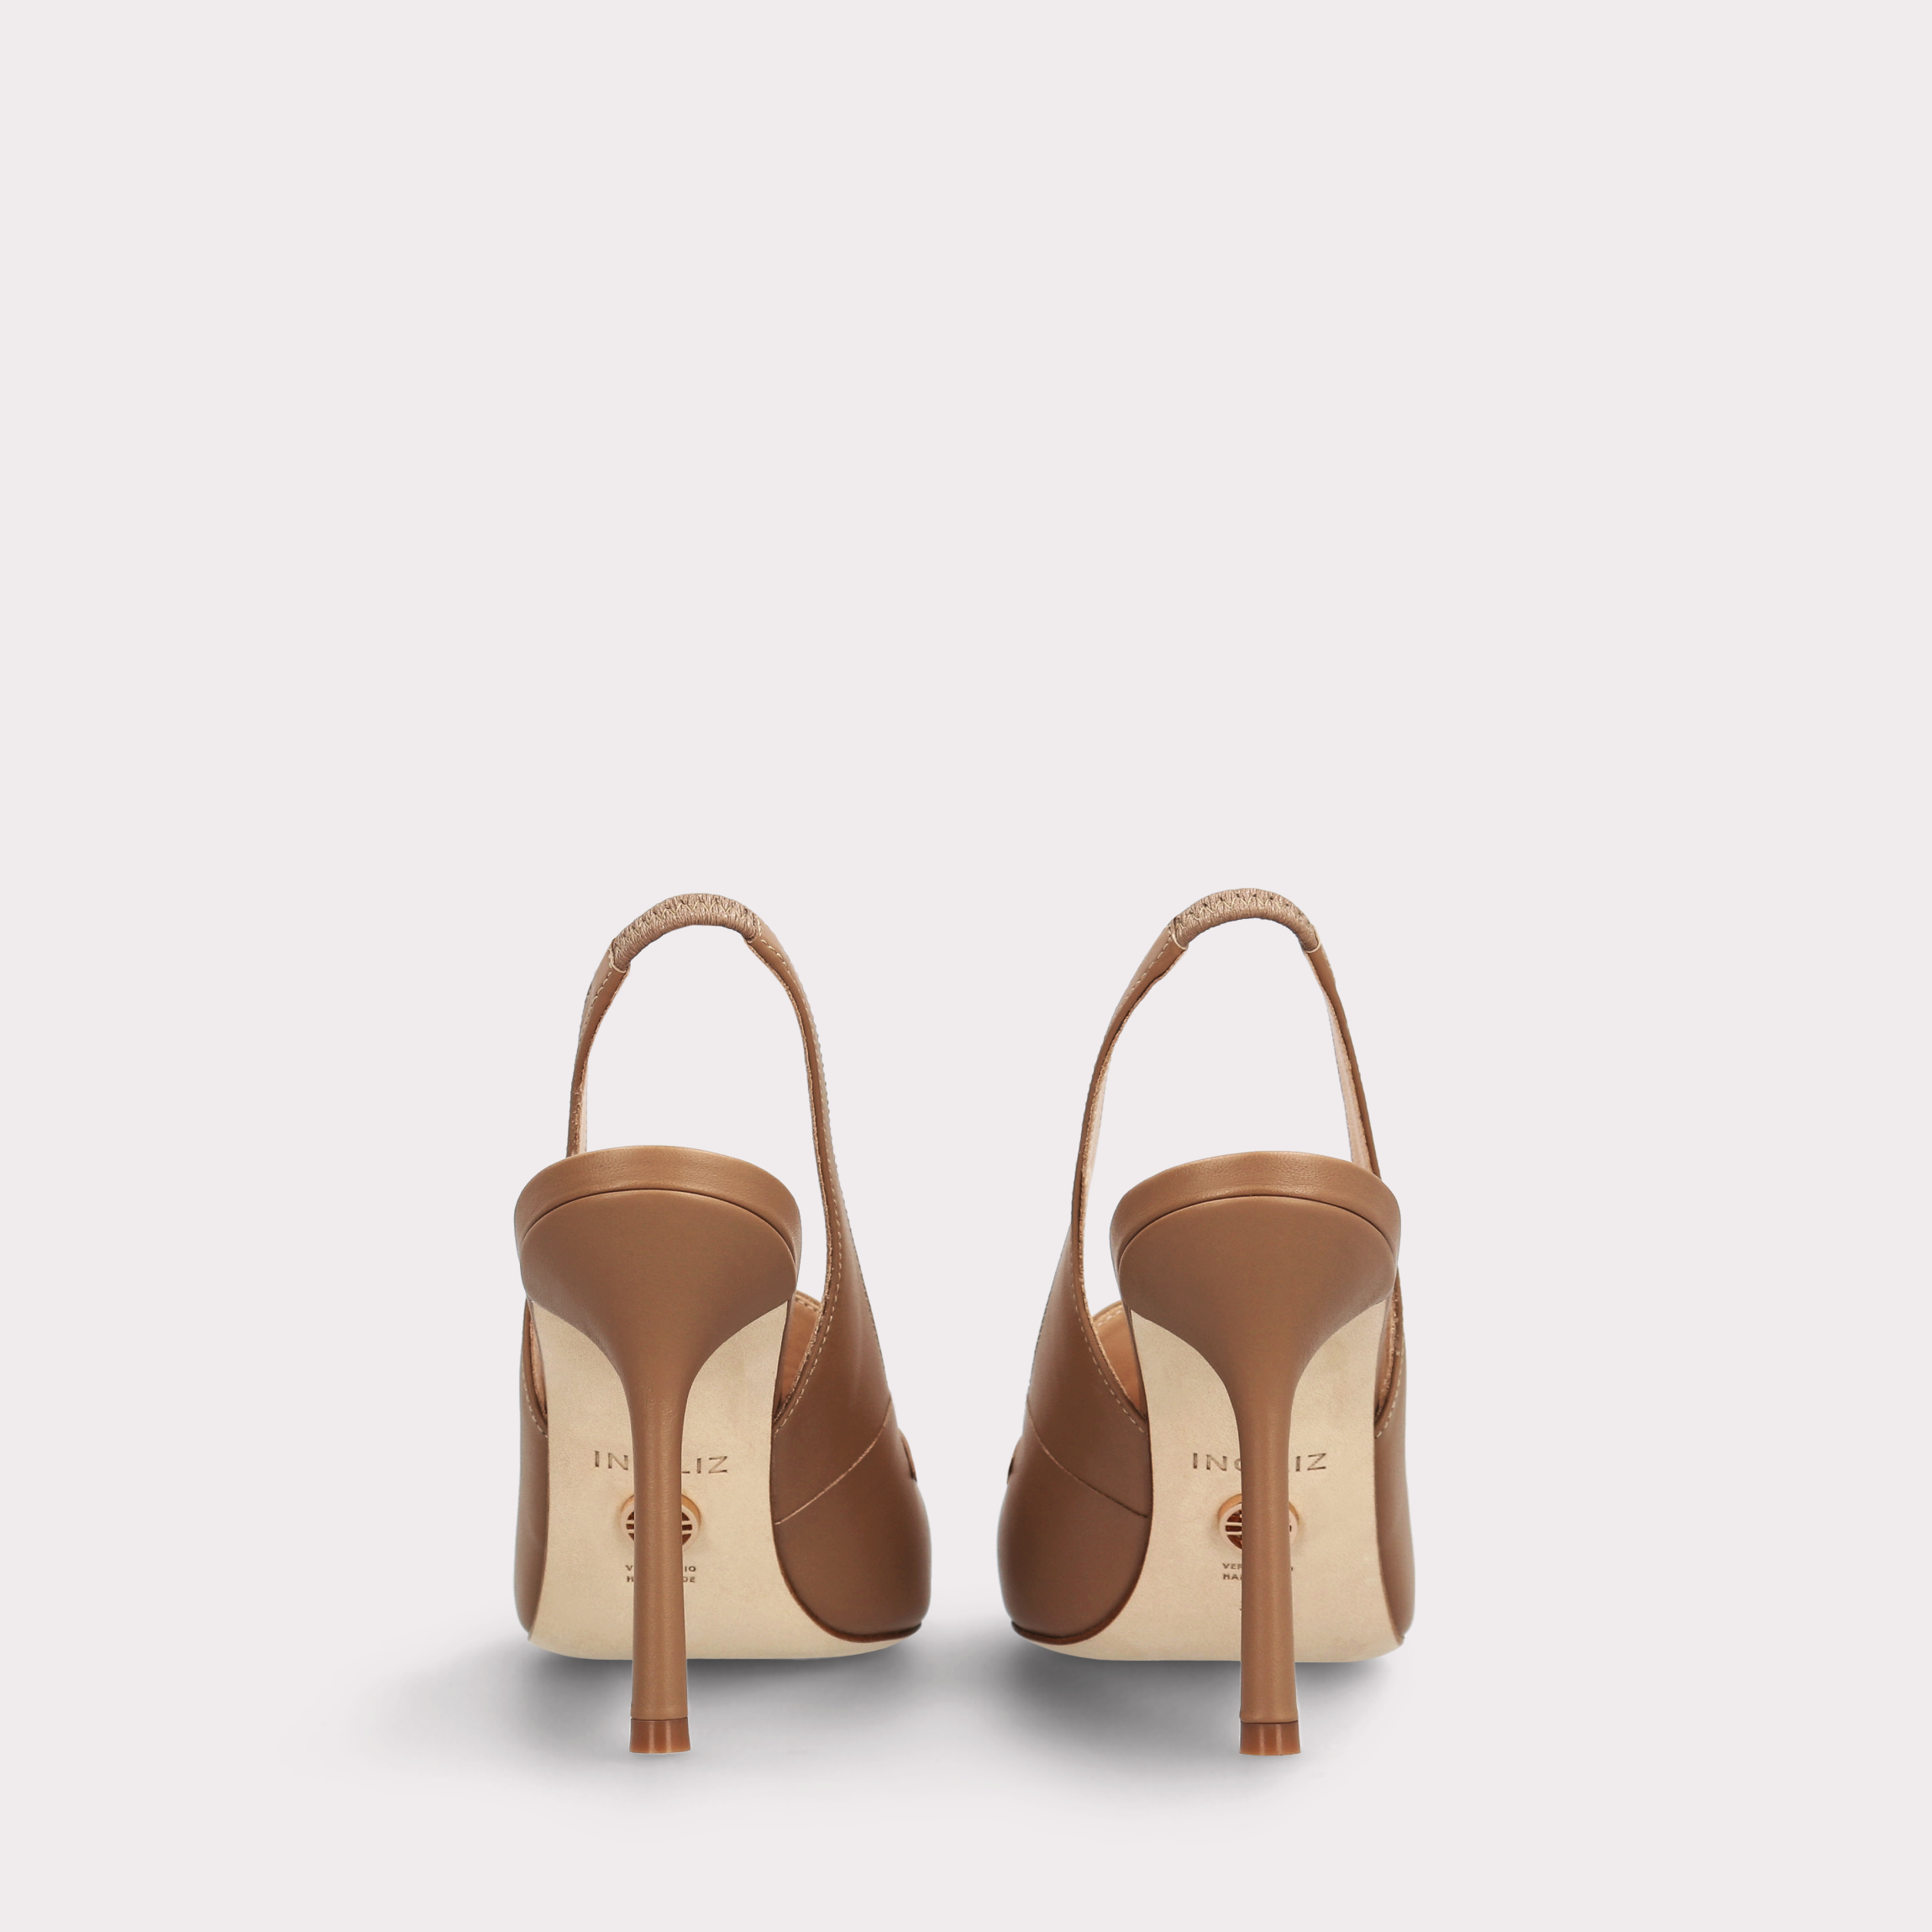 ABA 15 NUDE LEATHER PUMPS